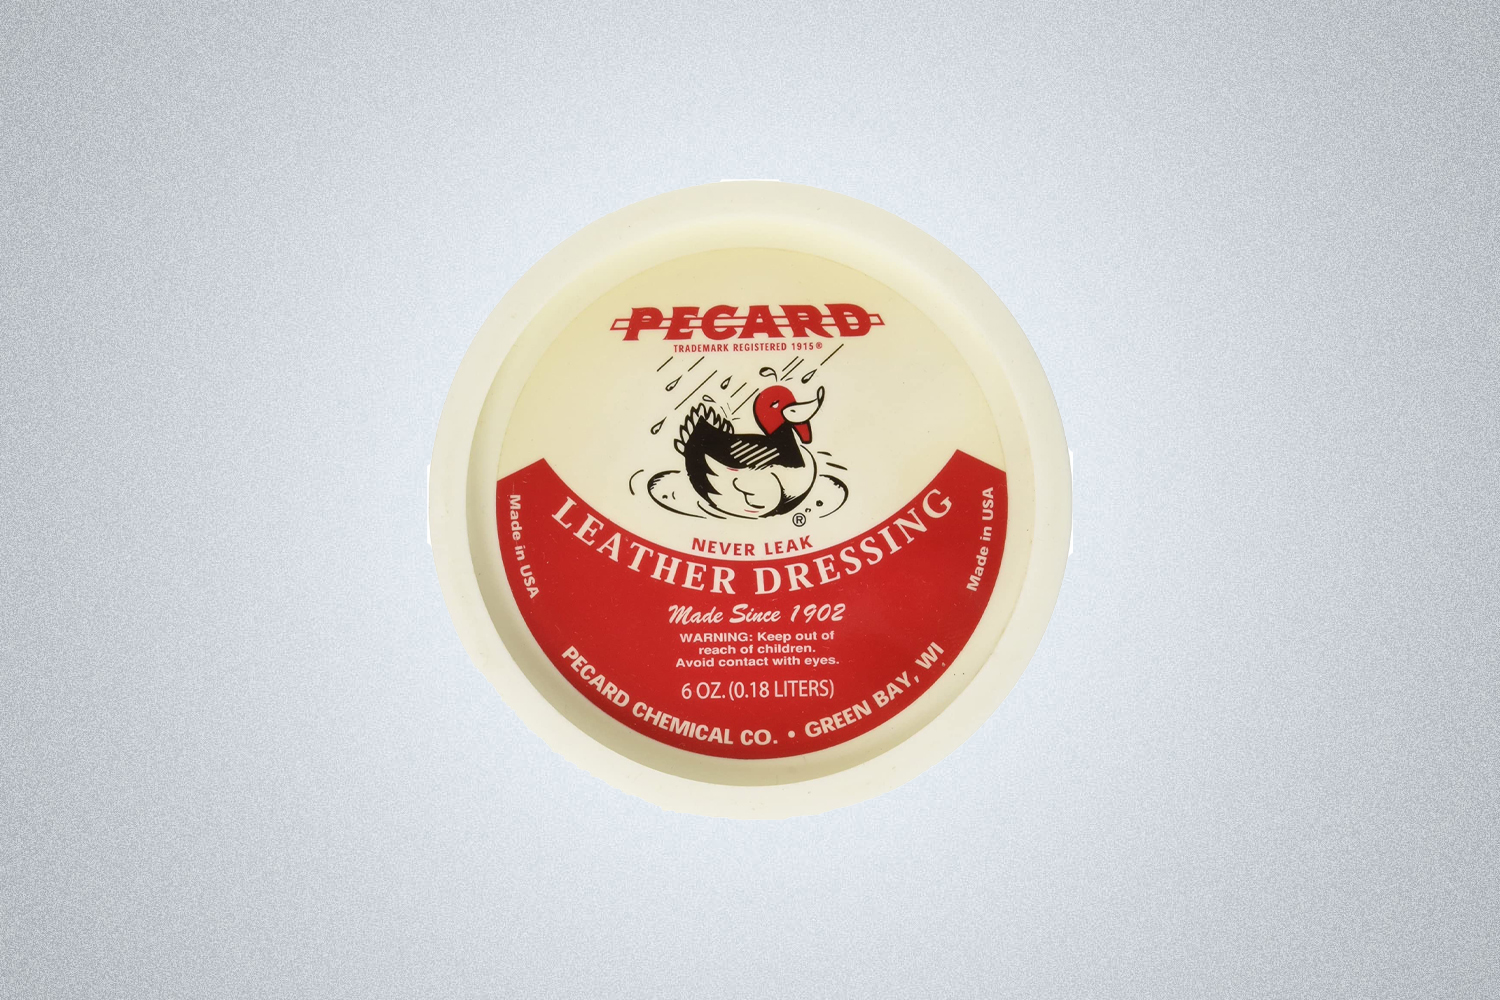 Pecard Leather Dressing for moisturizing and taking care of leather boots